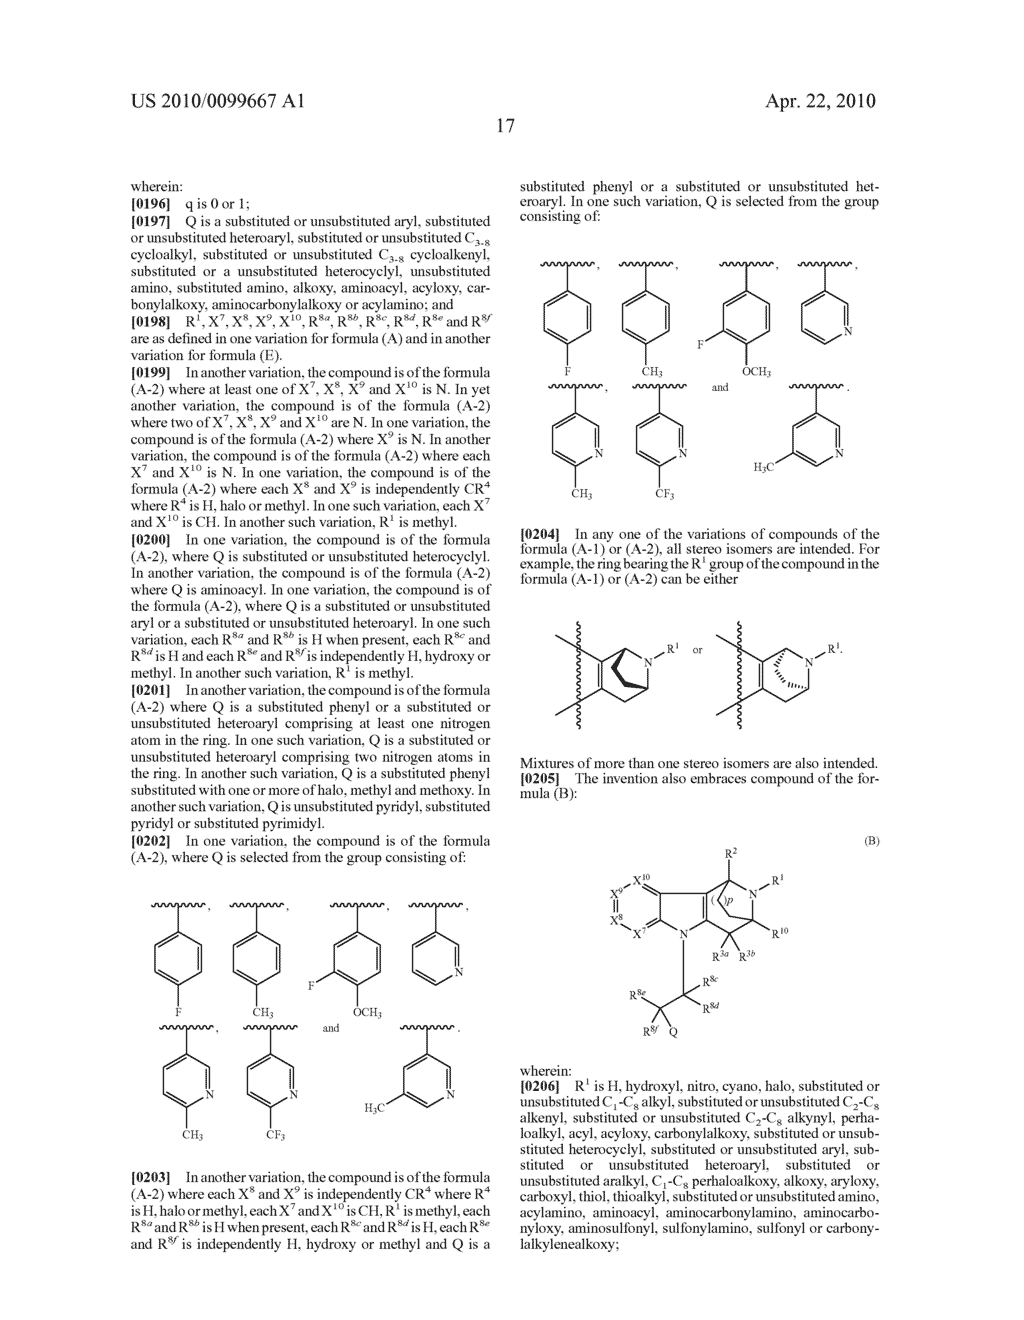 BRIDGED HETEROCYCLIC COMPOUNDS AND METHODS OF USE - diagram, schematic, and image 18